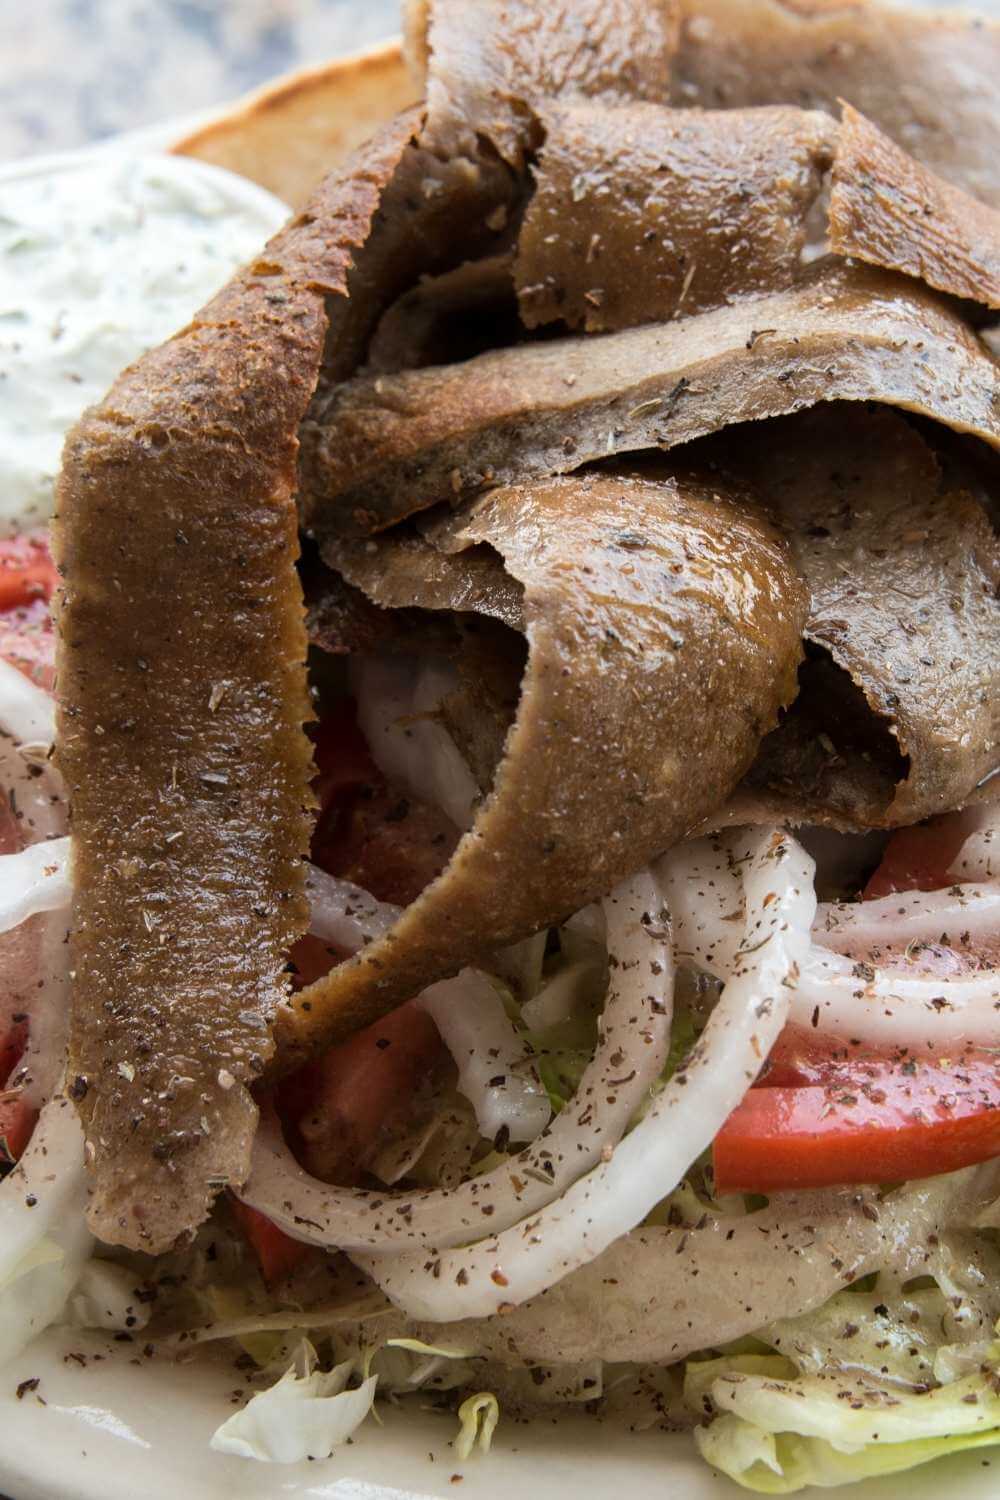 How To Cook Costco Gyro Meat?